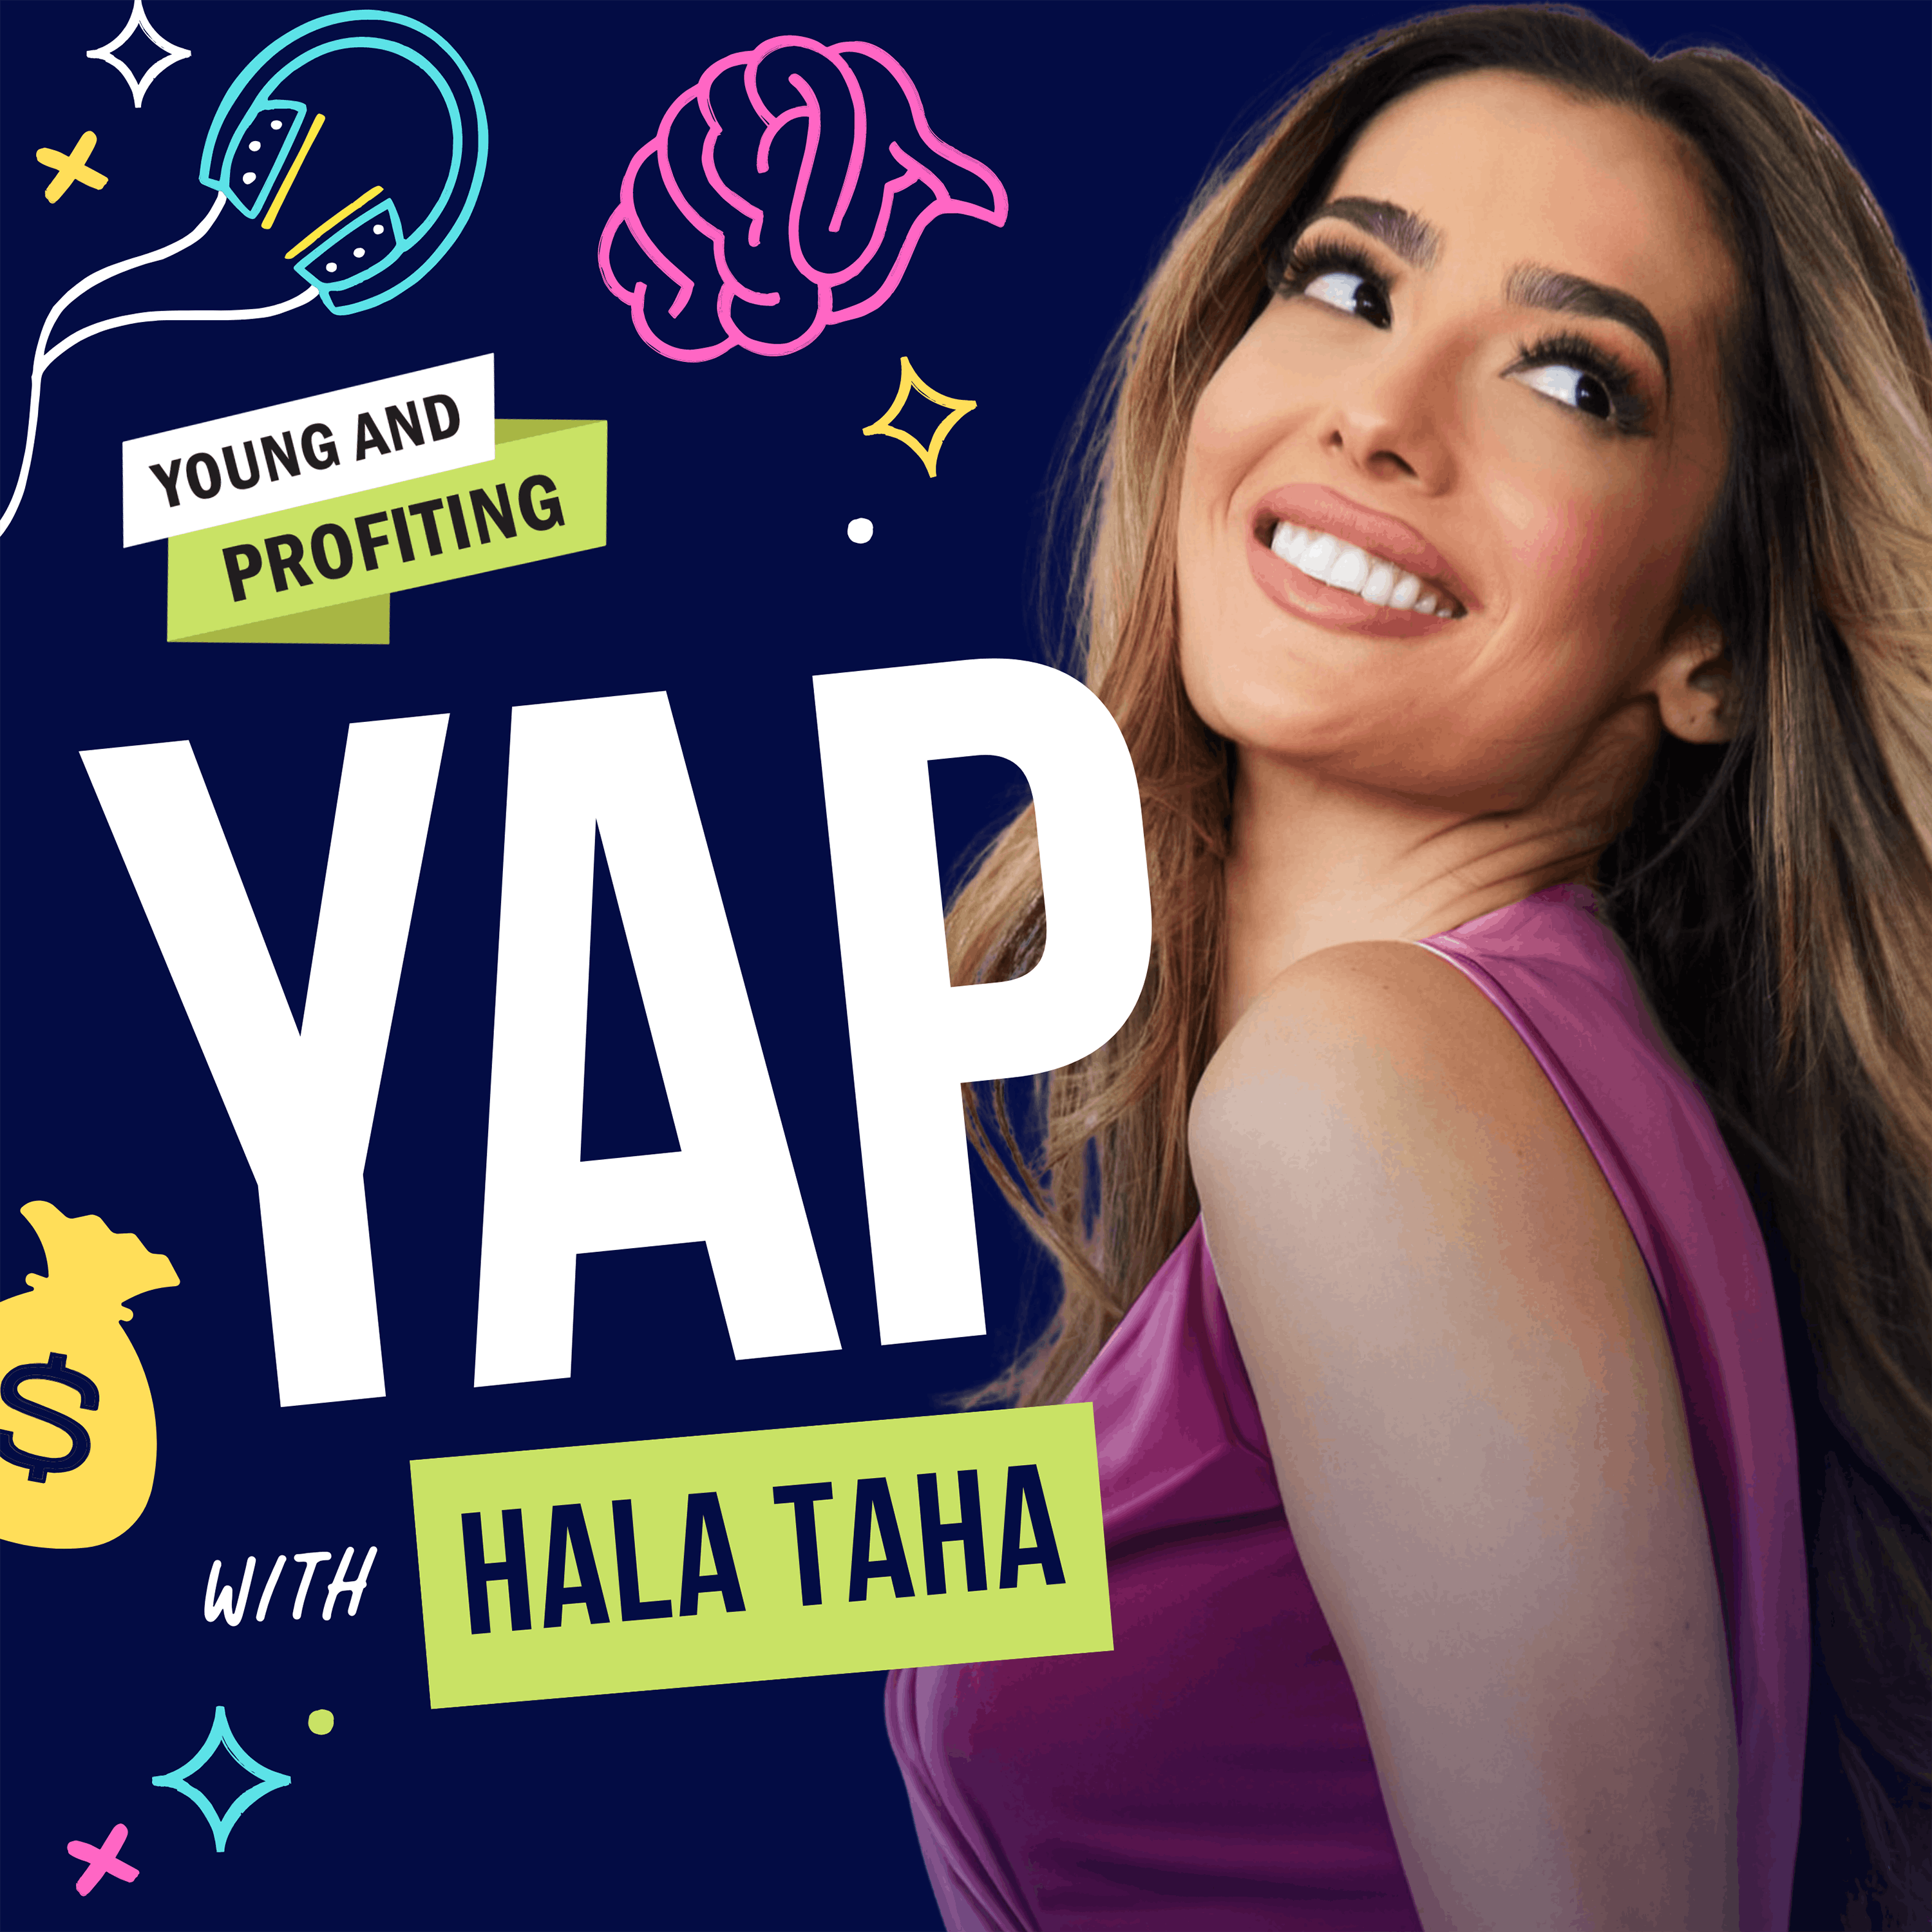 YAPSnacks: 2022 in Review, What I Learned From Interviewing 50+ People at the Top of Their Game by Hala Taha | YAP Media Network